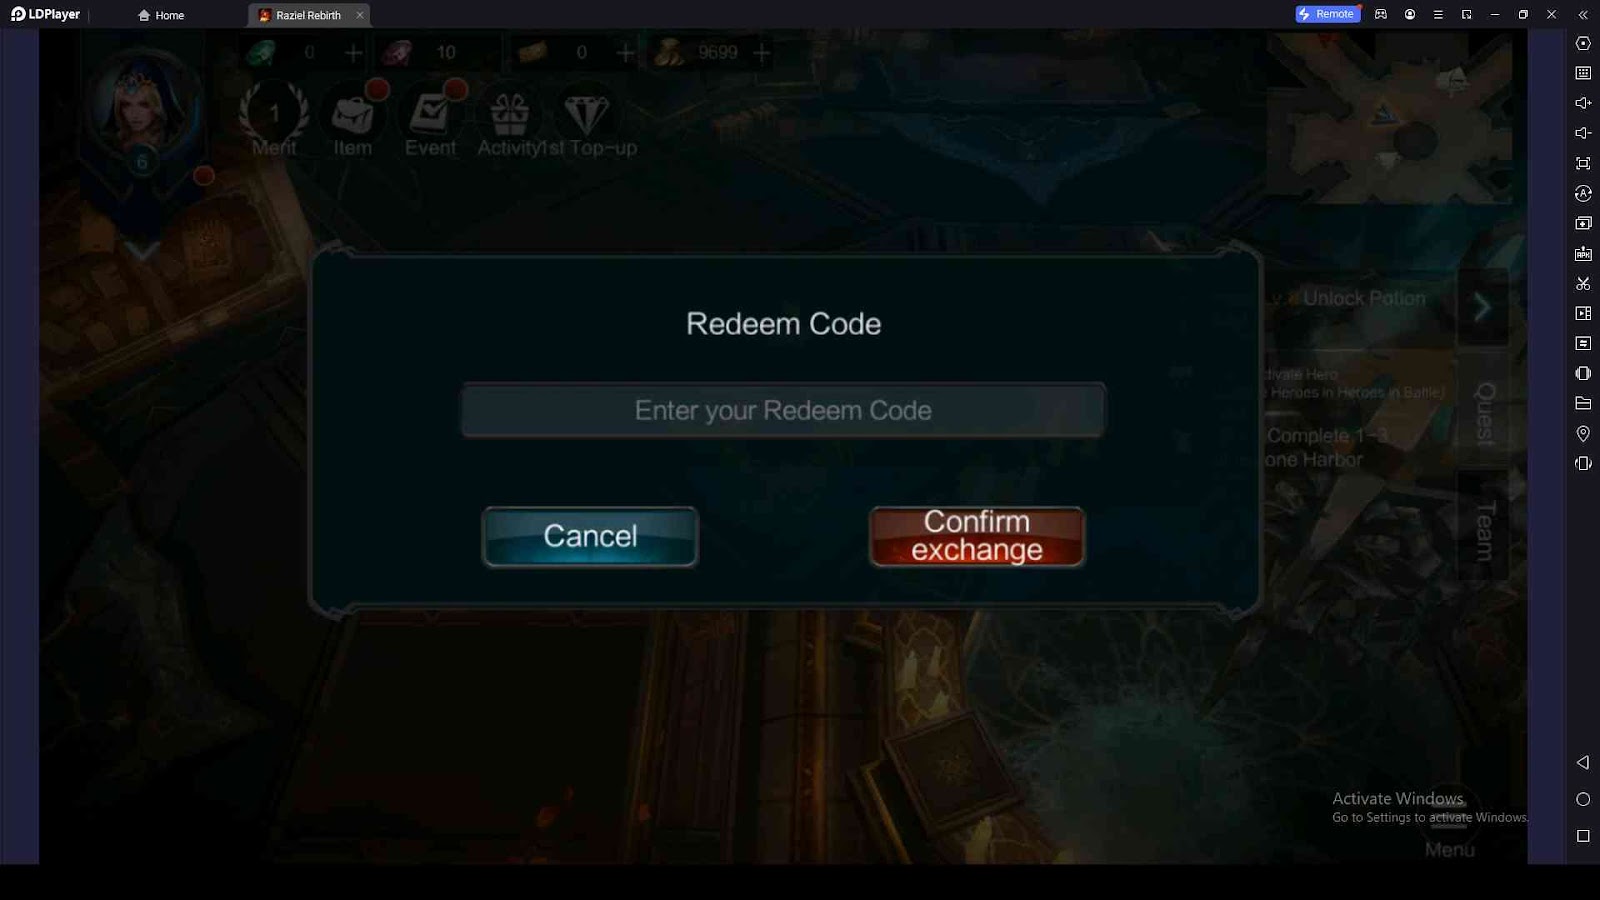 How to Get More Codes